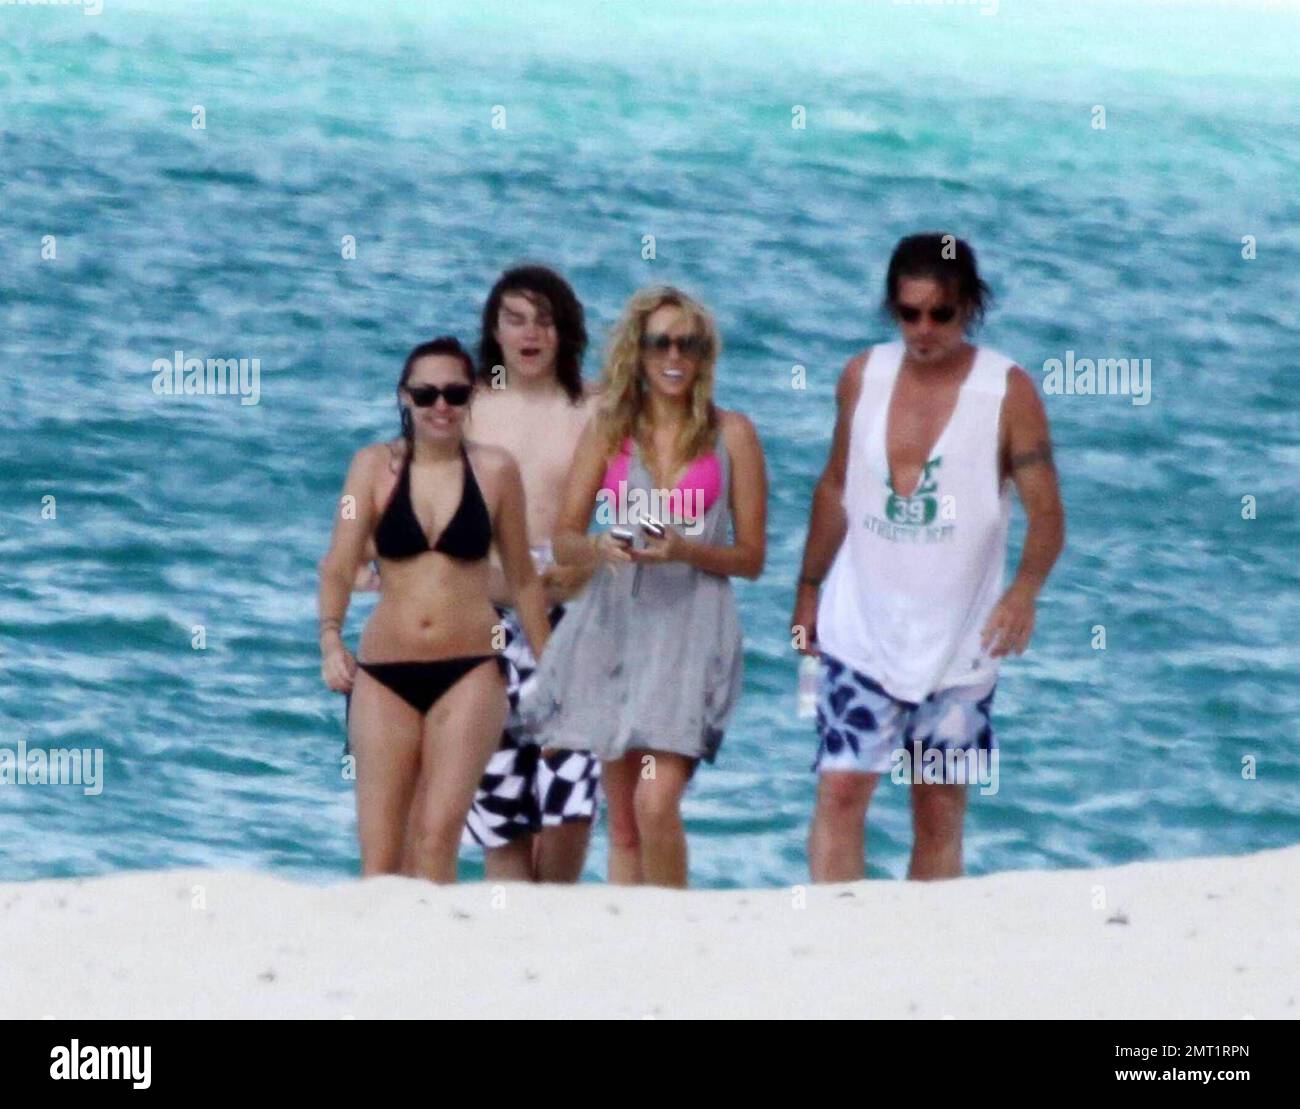 Exclusive!! Miley Cyrus enjoys a day at the beach jetskking with her whole  family on her mother Leticia 'Tish' Cyrus' birthday. The Cyrus family are  enjoying time on an Island in the